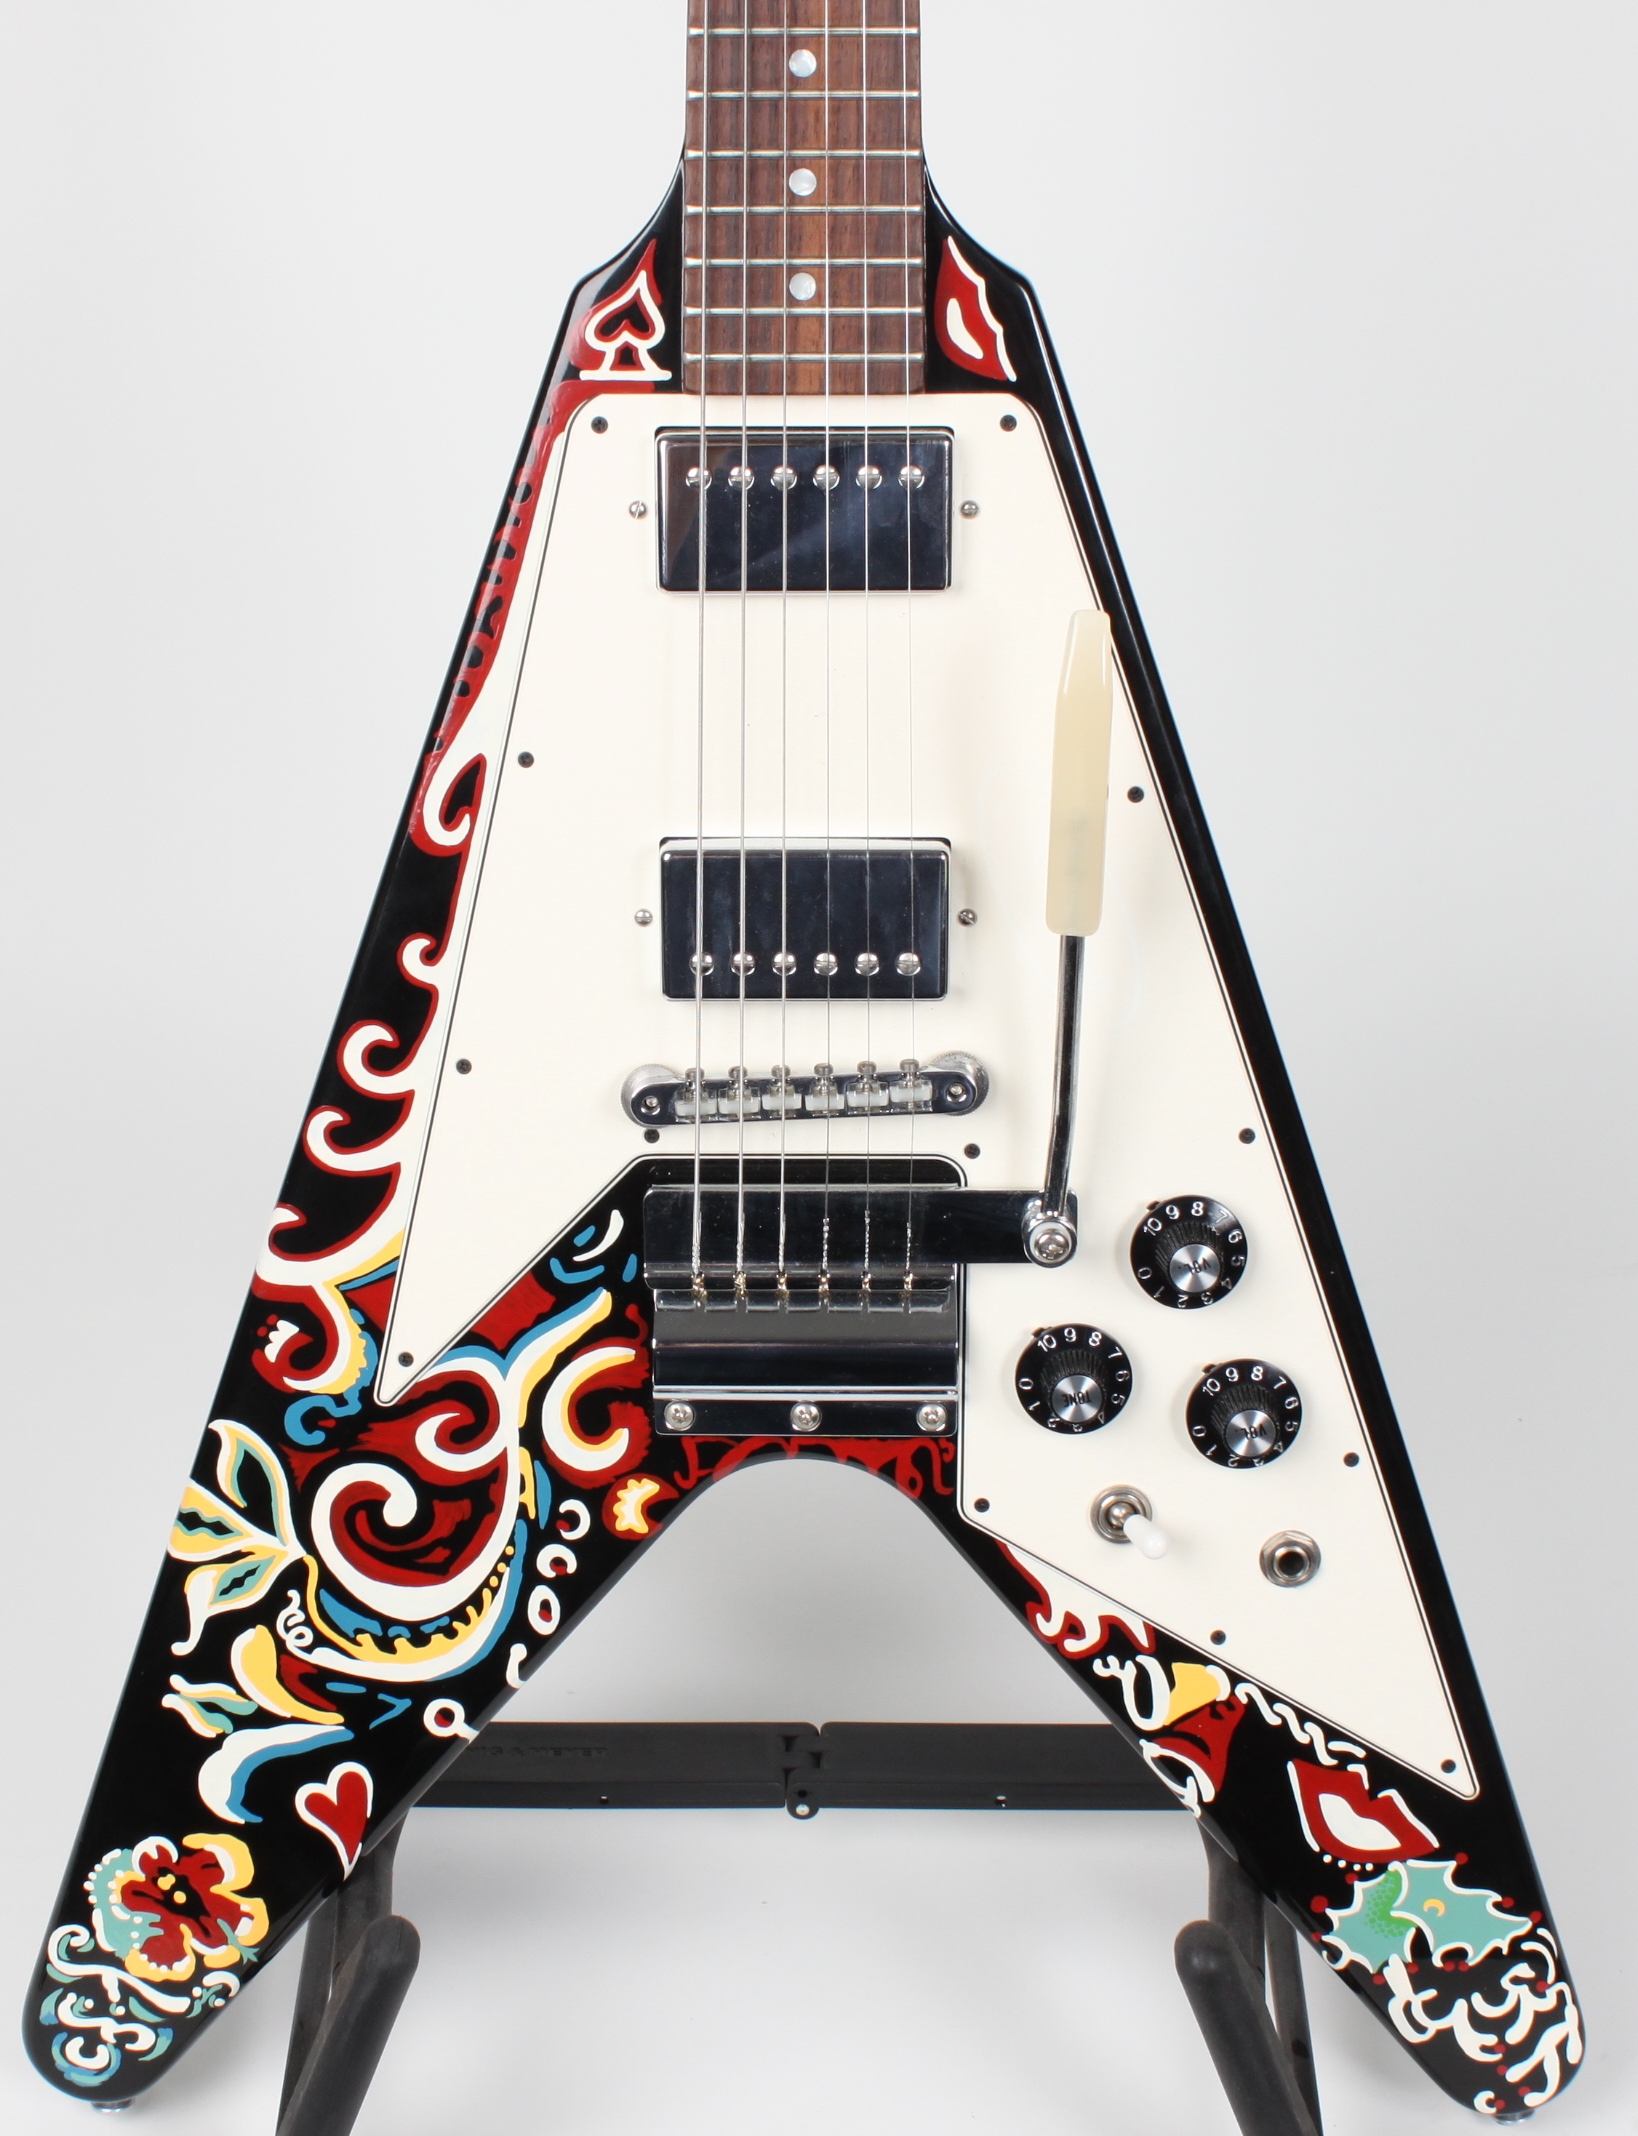 

Rare Jimi Hendrix Psychedelic Hand Painted Flying V Electric Guitar Maestro Vibrato Tremolo Tailpiece, Chrome Hardware, Tuilp Tuners, Dot Inlay, White Pickguard